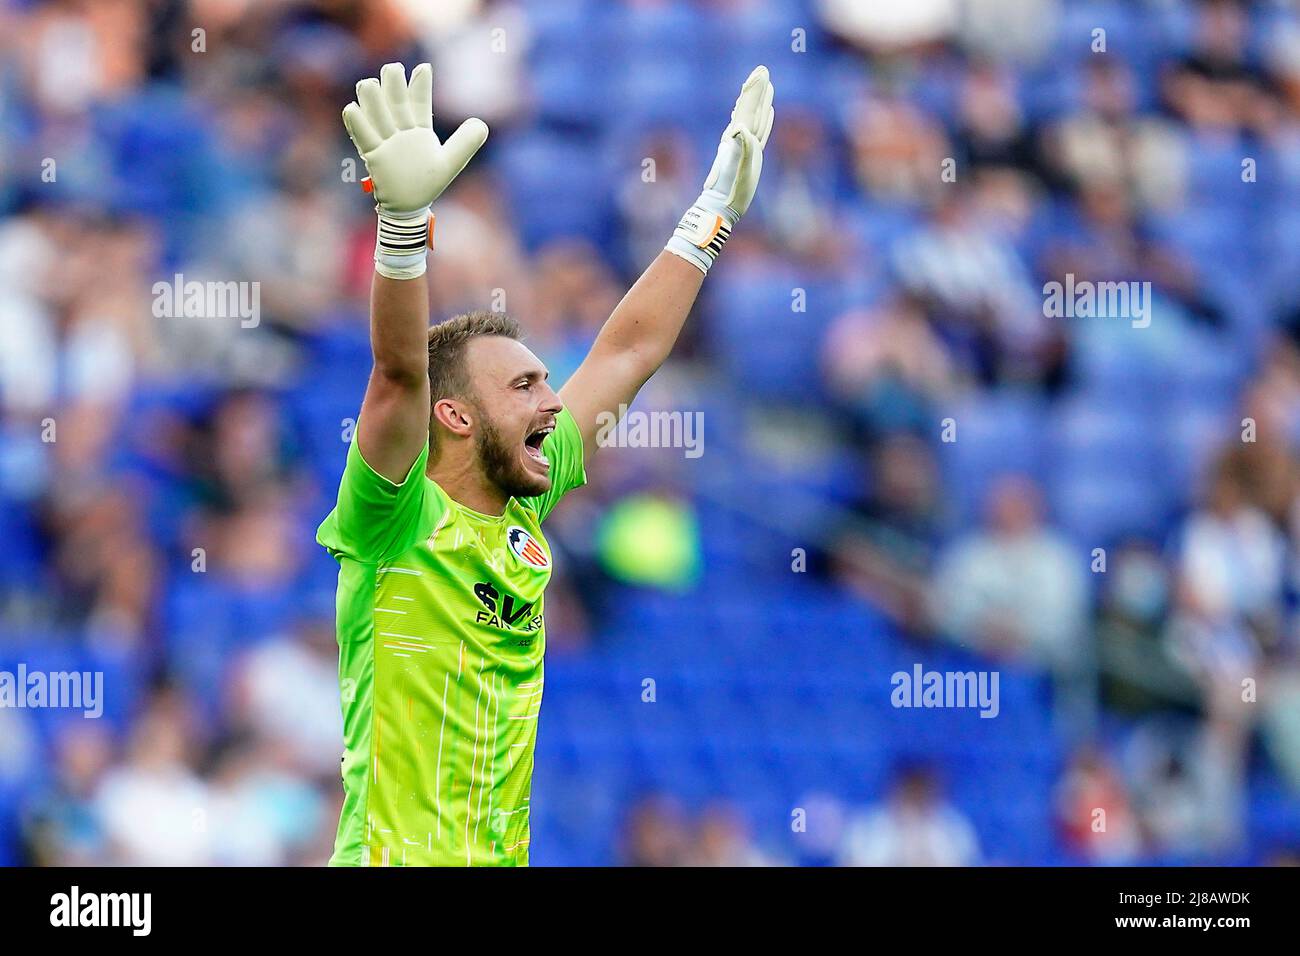 Jasper Cillessen of Valencia CF during the La Liga match between RCD Espanyol and Valencia CF played at RCDE Stadium on May 14, 2022 in Barcelona, Spain. (Photo by PRESSINPHOTO) Stock Photo